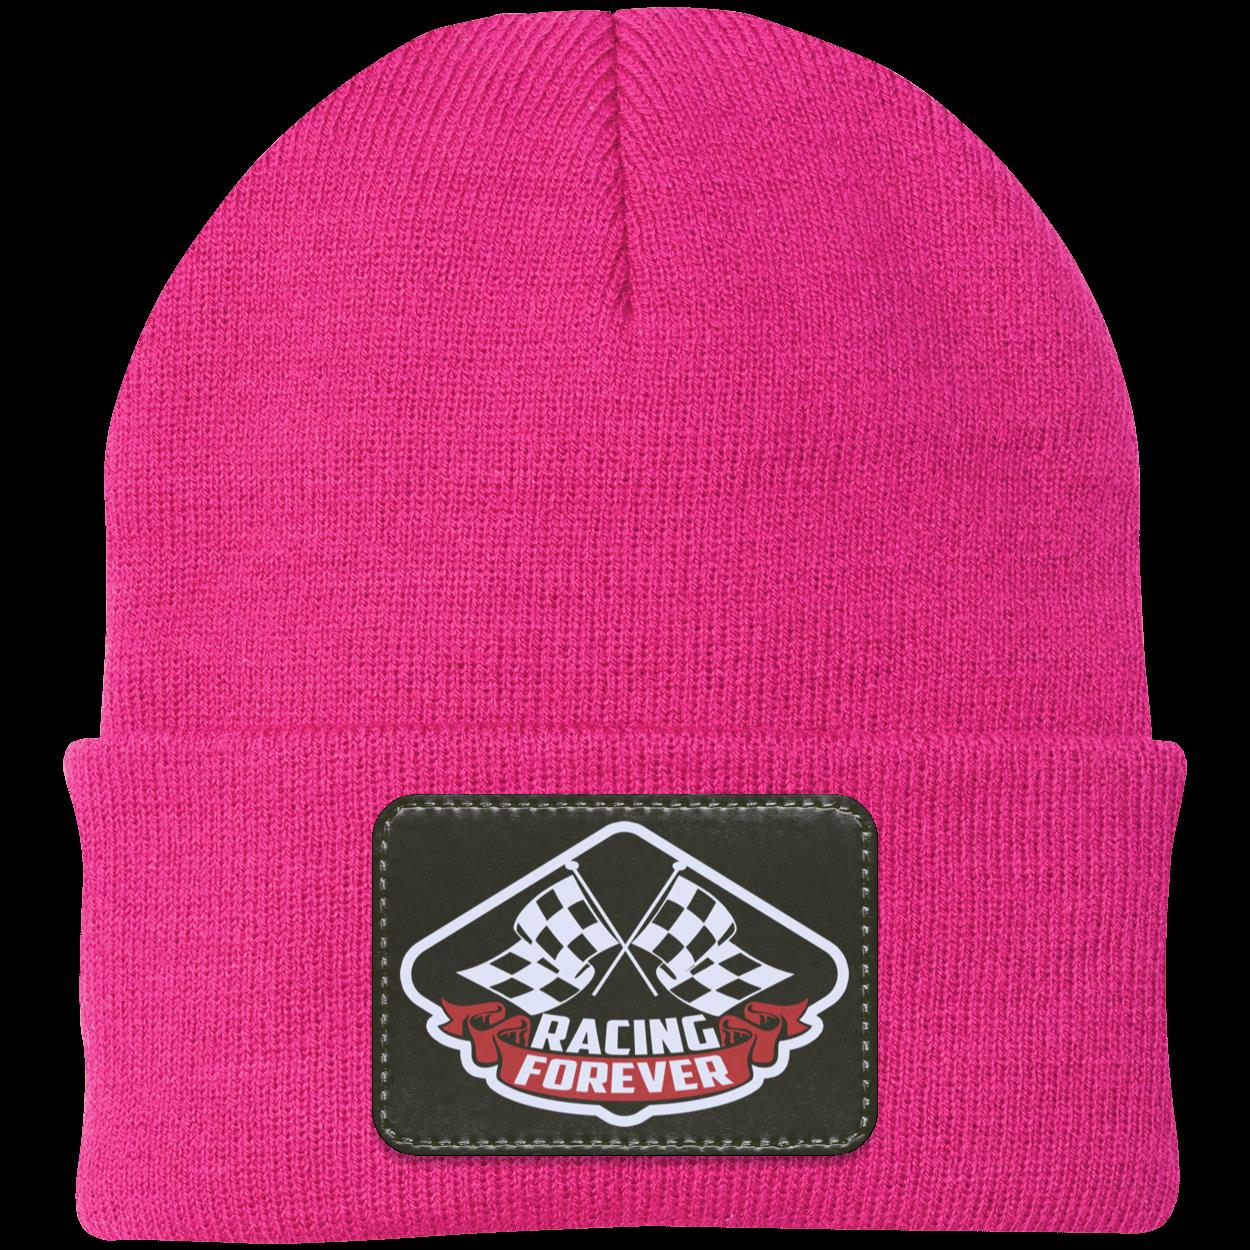 Racing Forever Patched Knit Cap V4